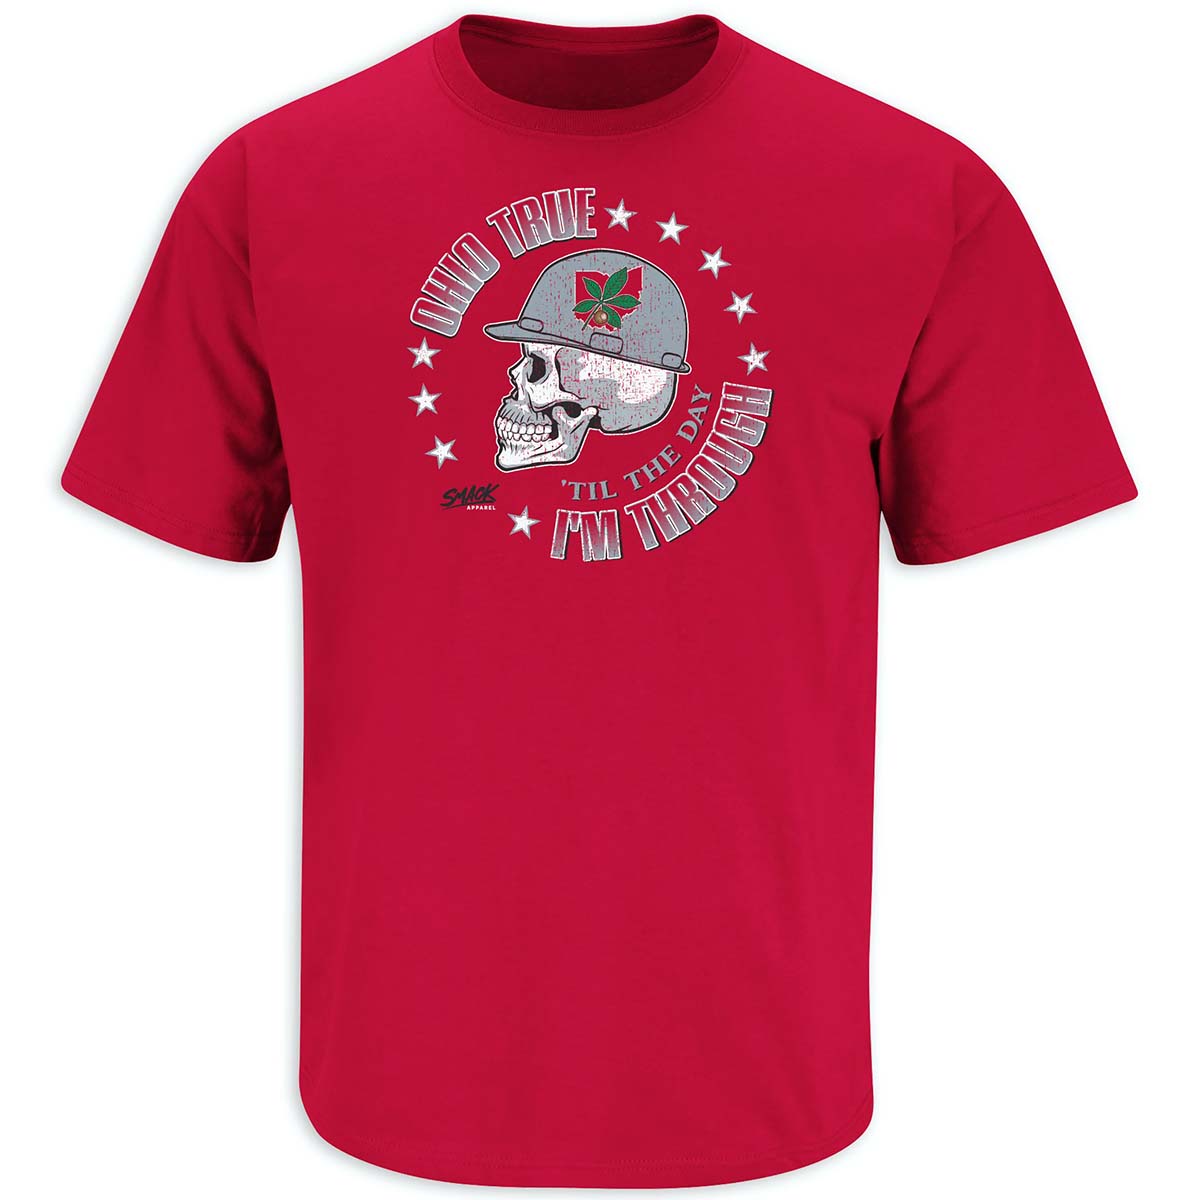  - Official Store of Ohio State Buckeye Sports Fans shirt